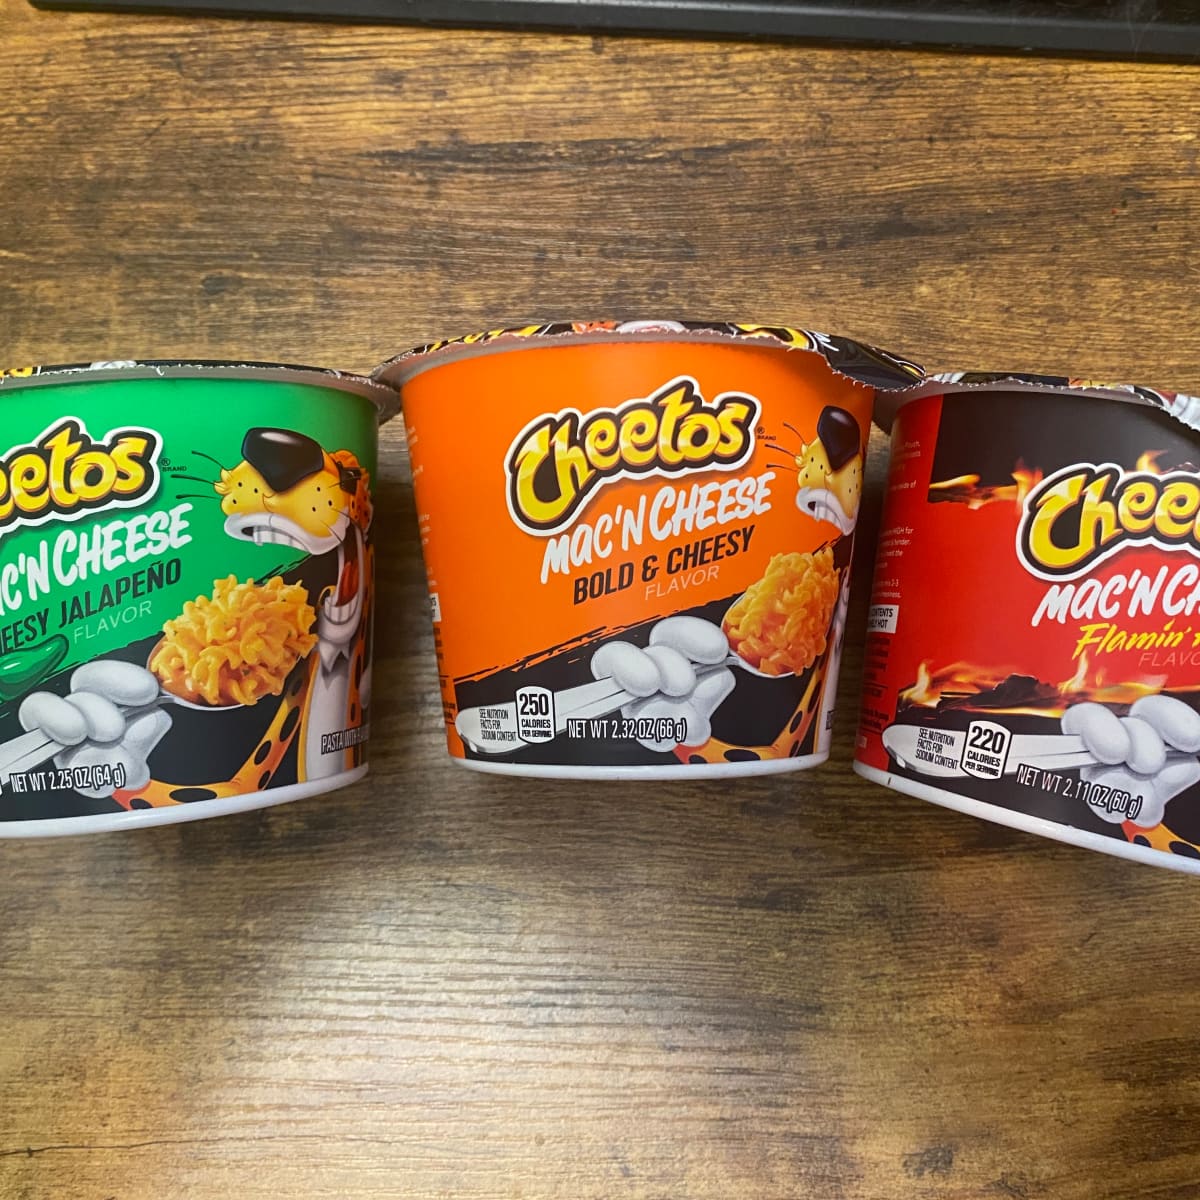 5 Super Tasty Tidbits About The Unhealthy Snack Of Cheetos